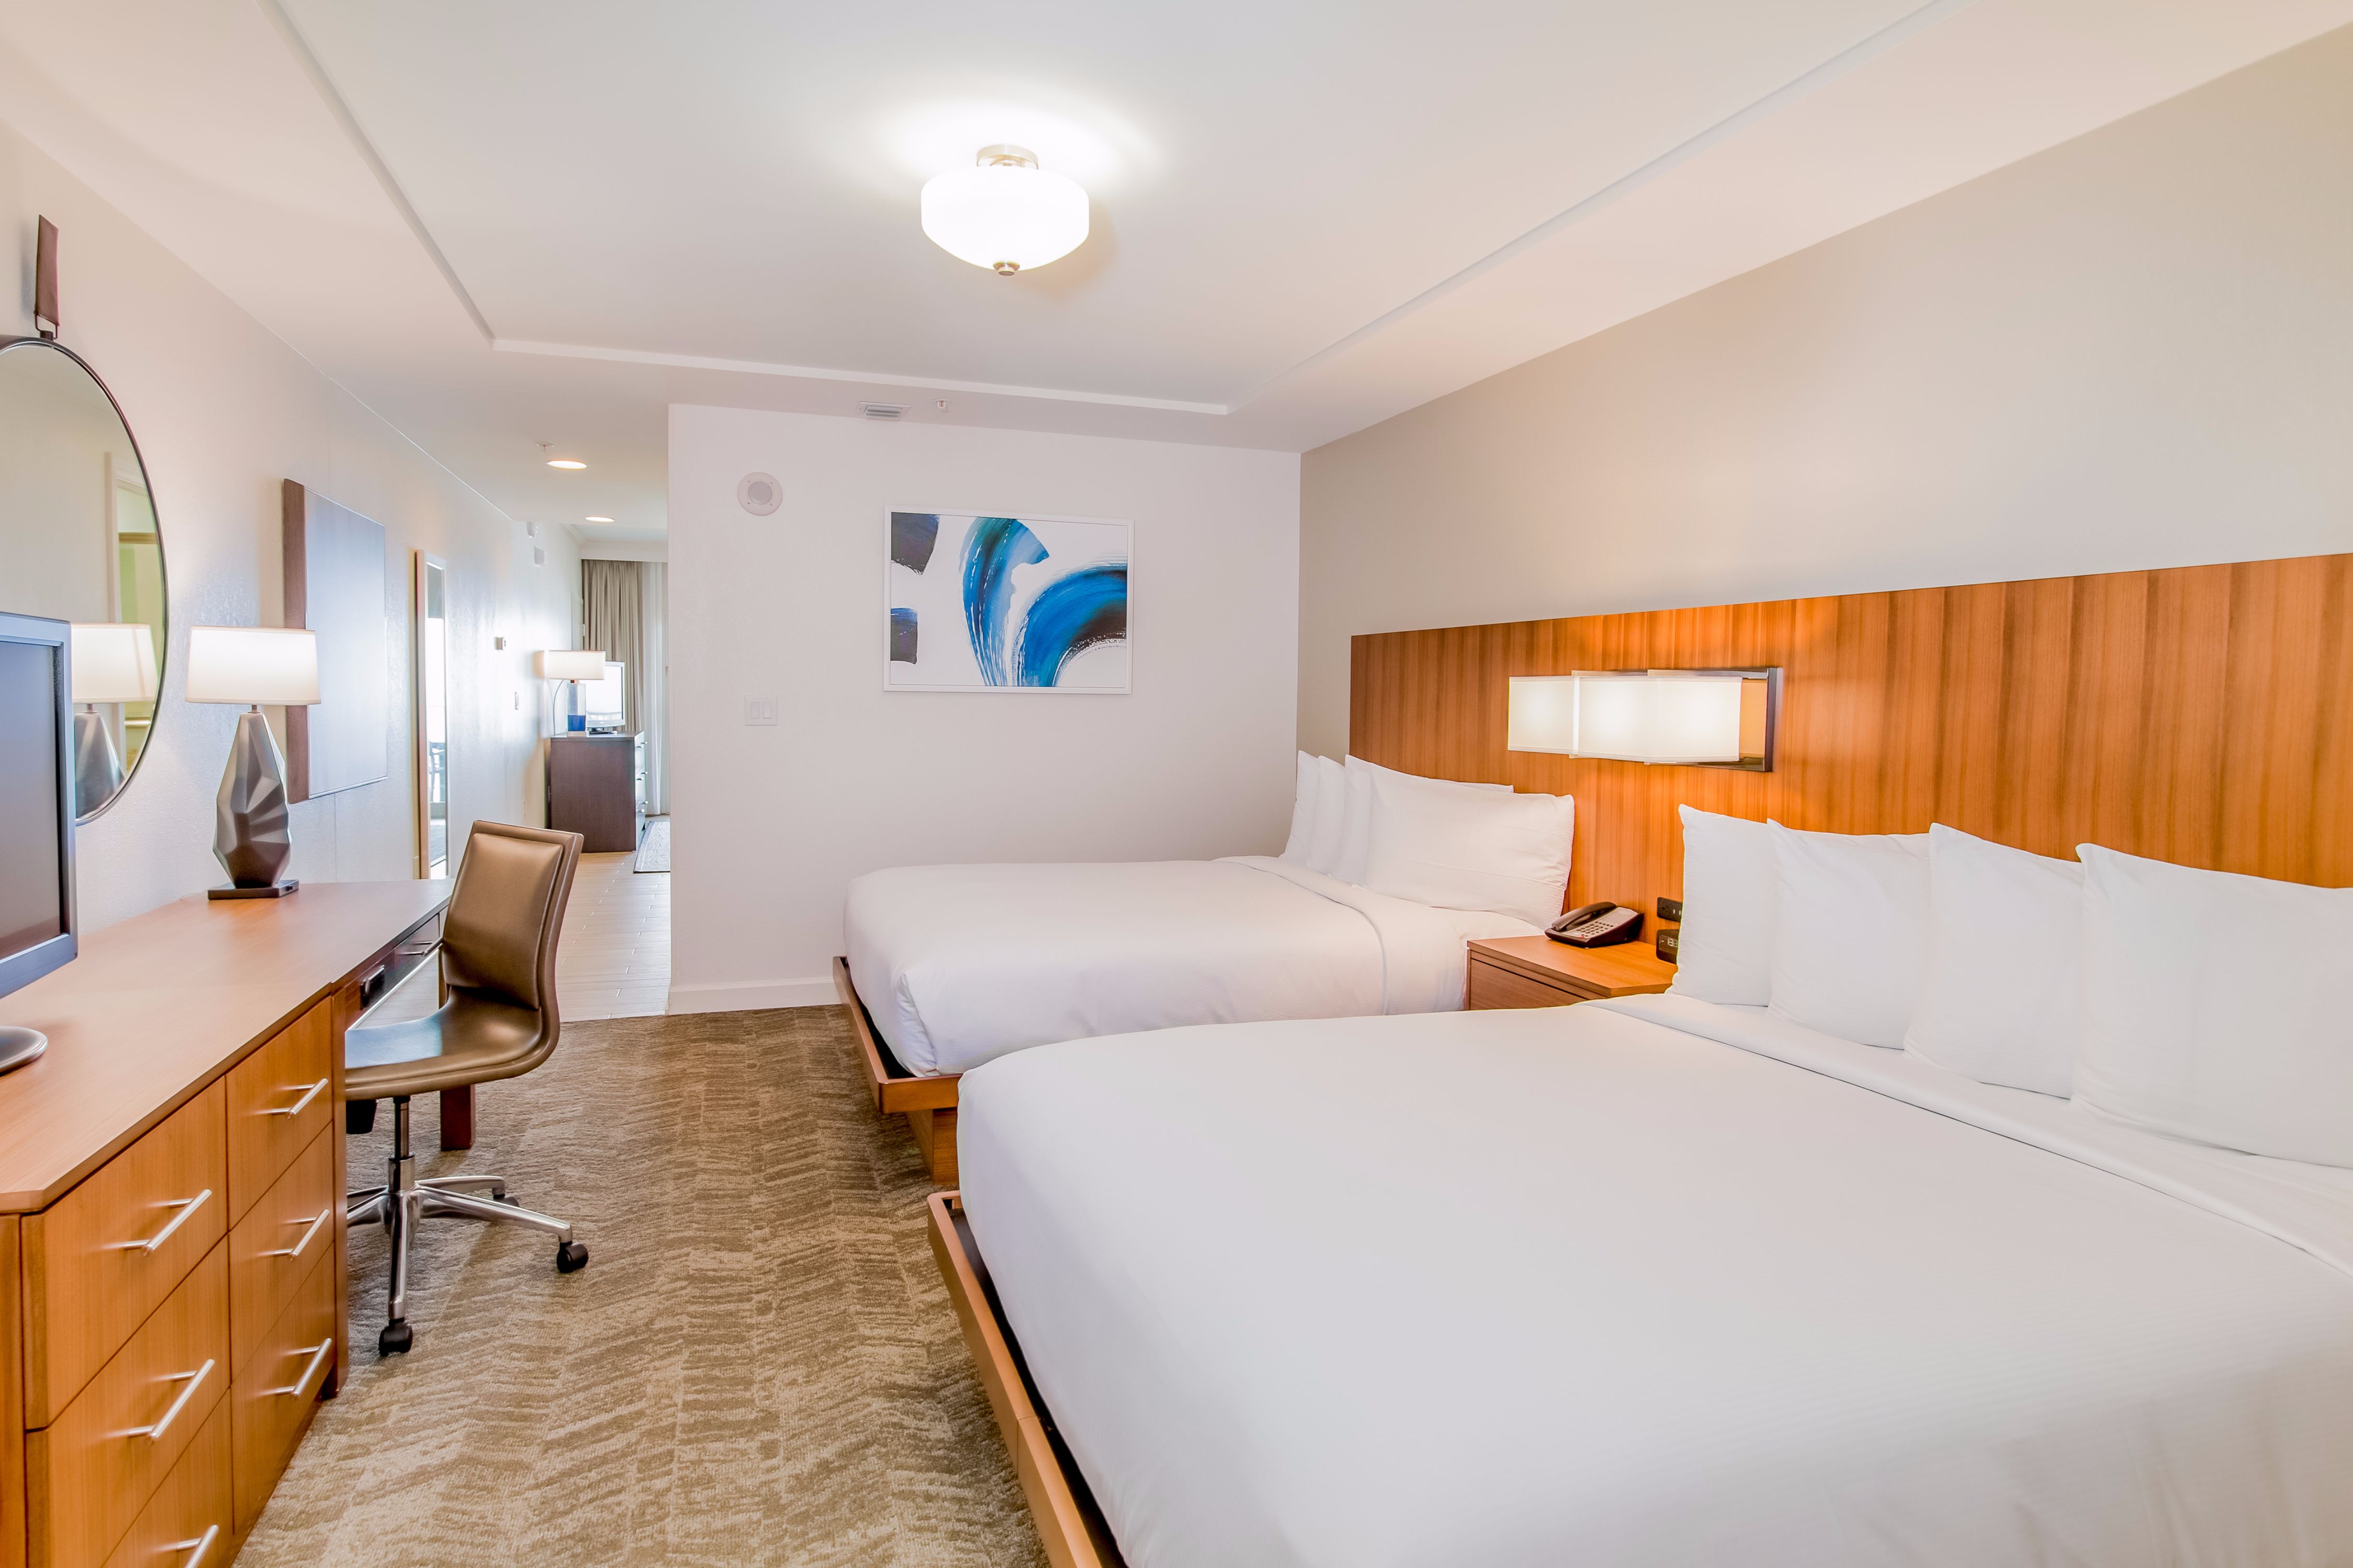 Junior suite with two queen beds, work desk, and TV